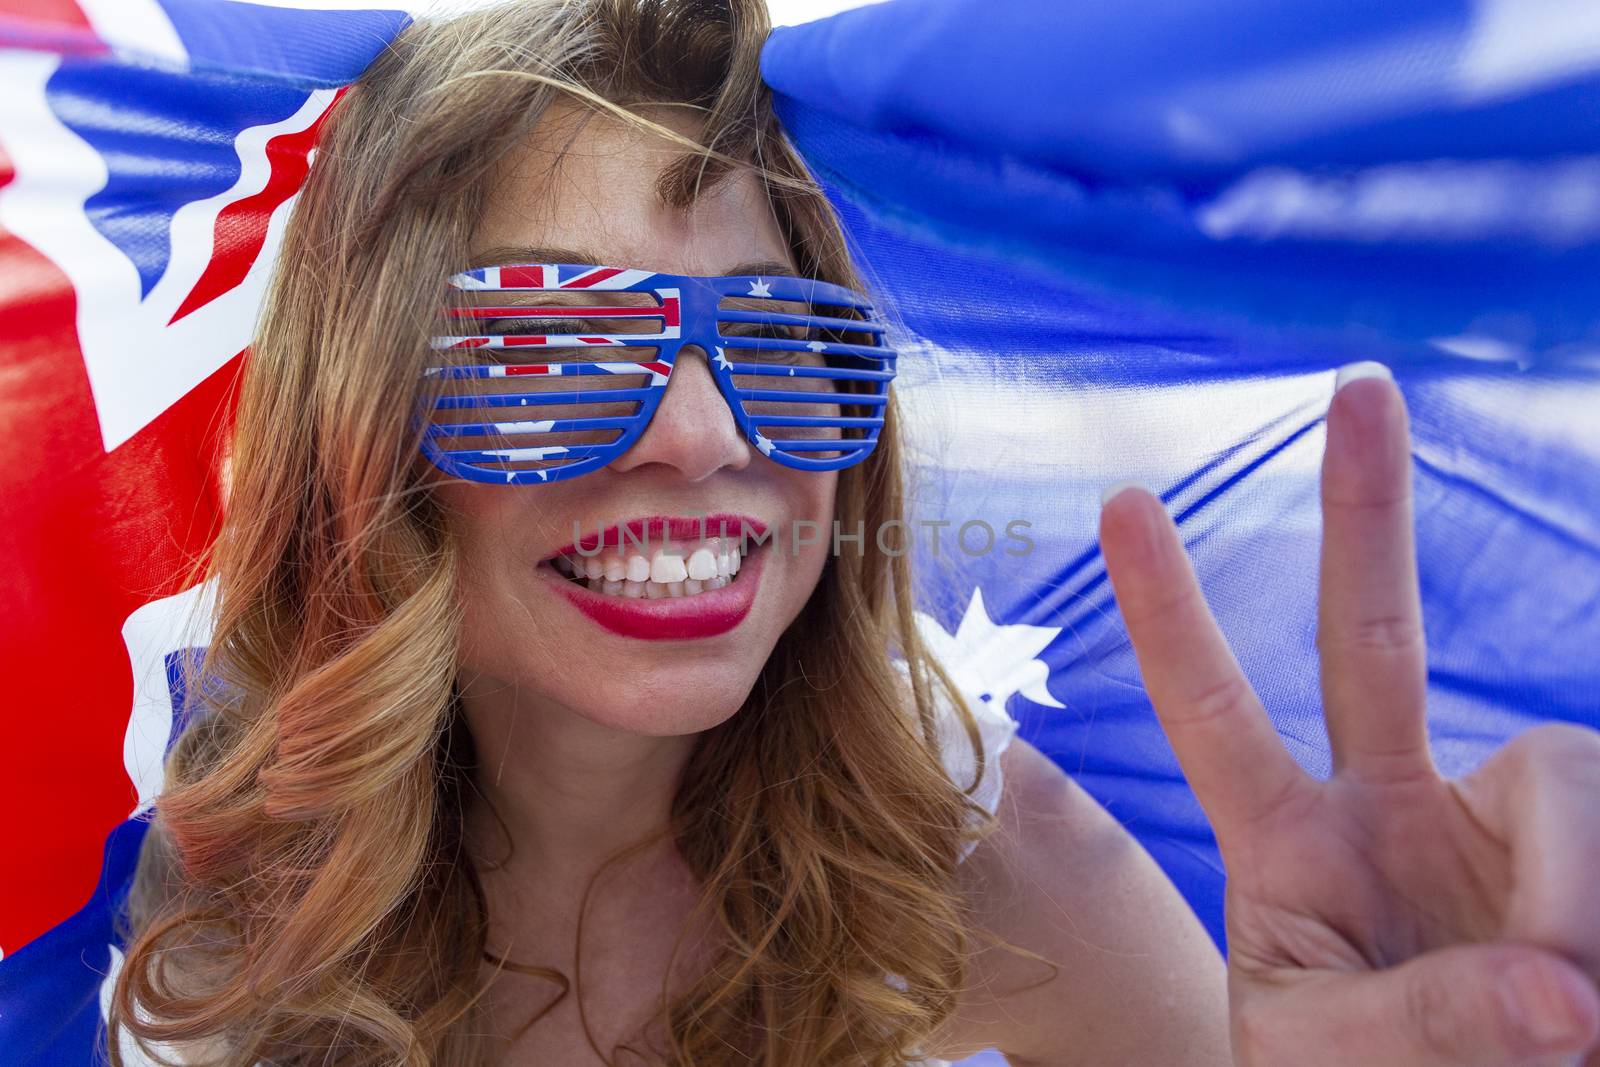 Patroitic multicultural woman celebrates with Australian flag